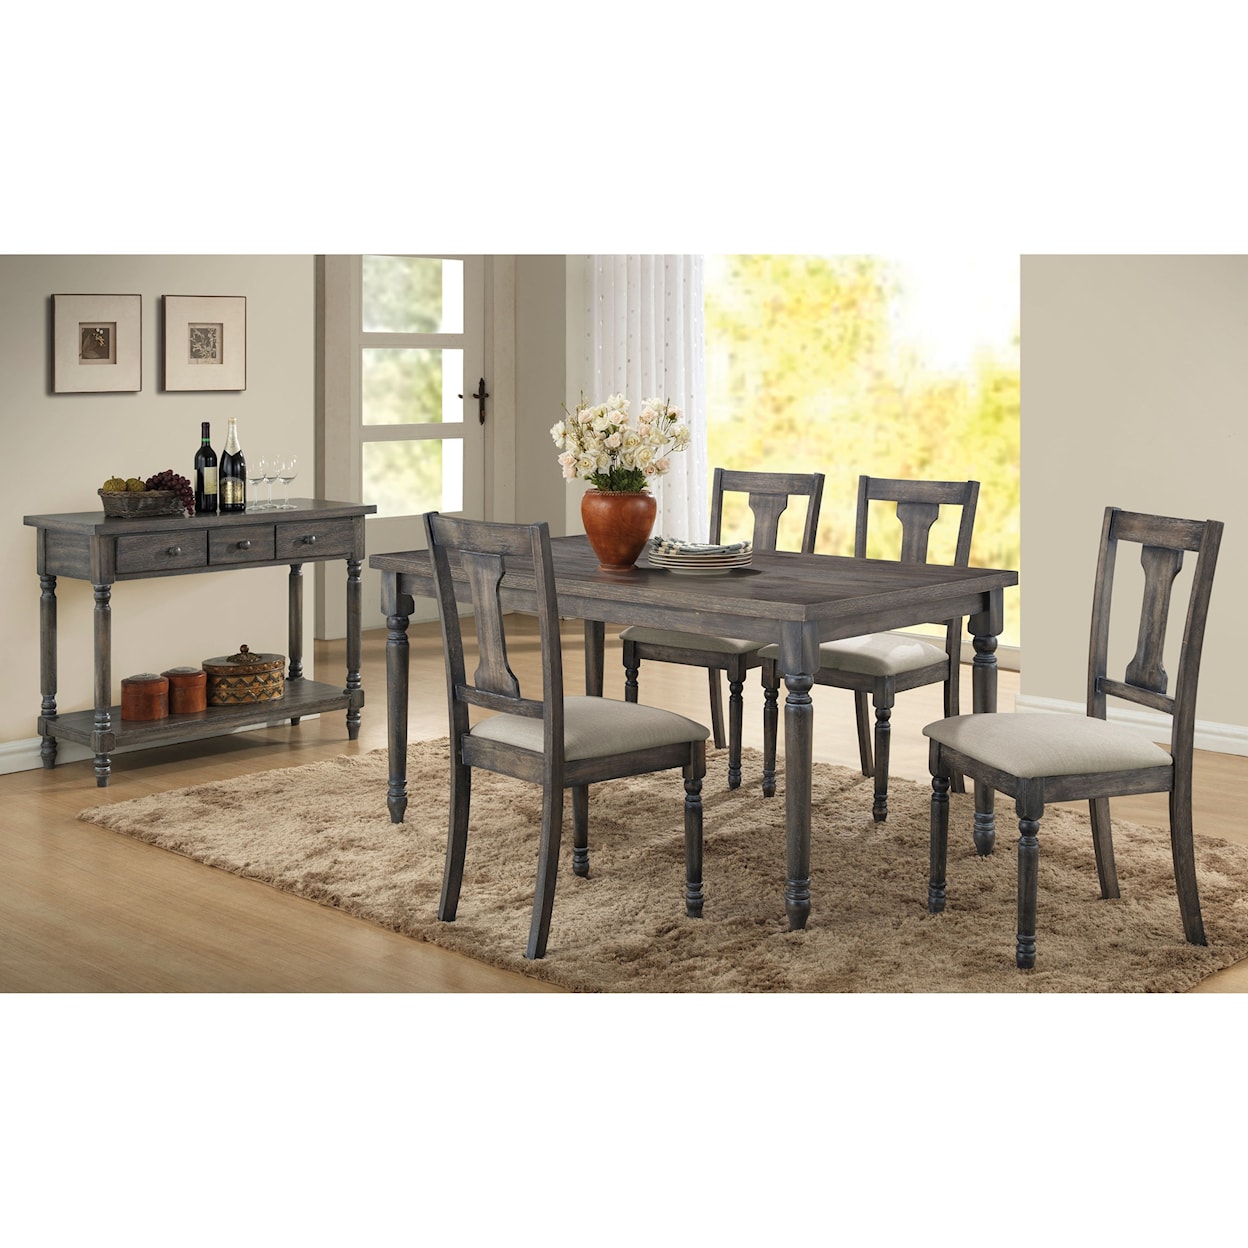 Acme Furniture Wallace Dining Table